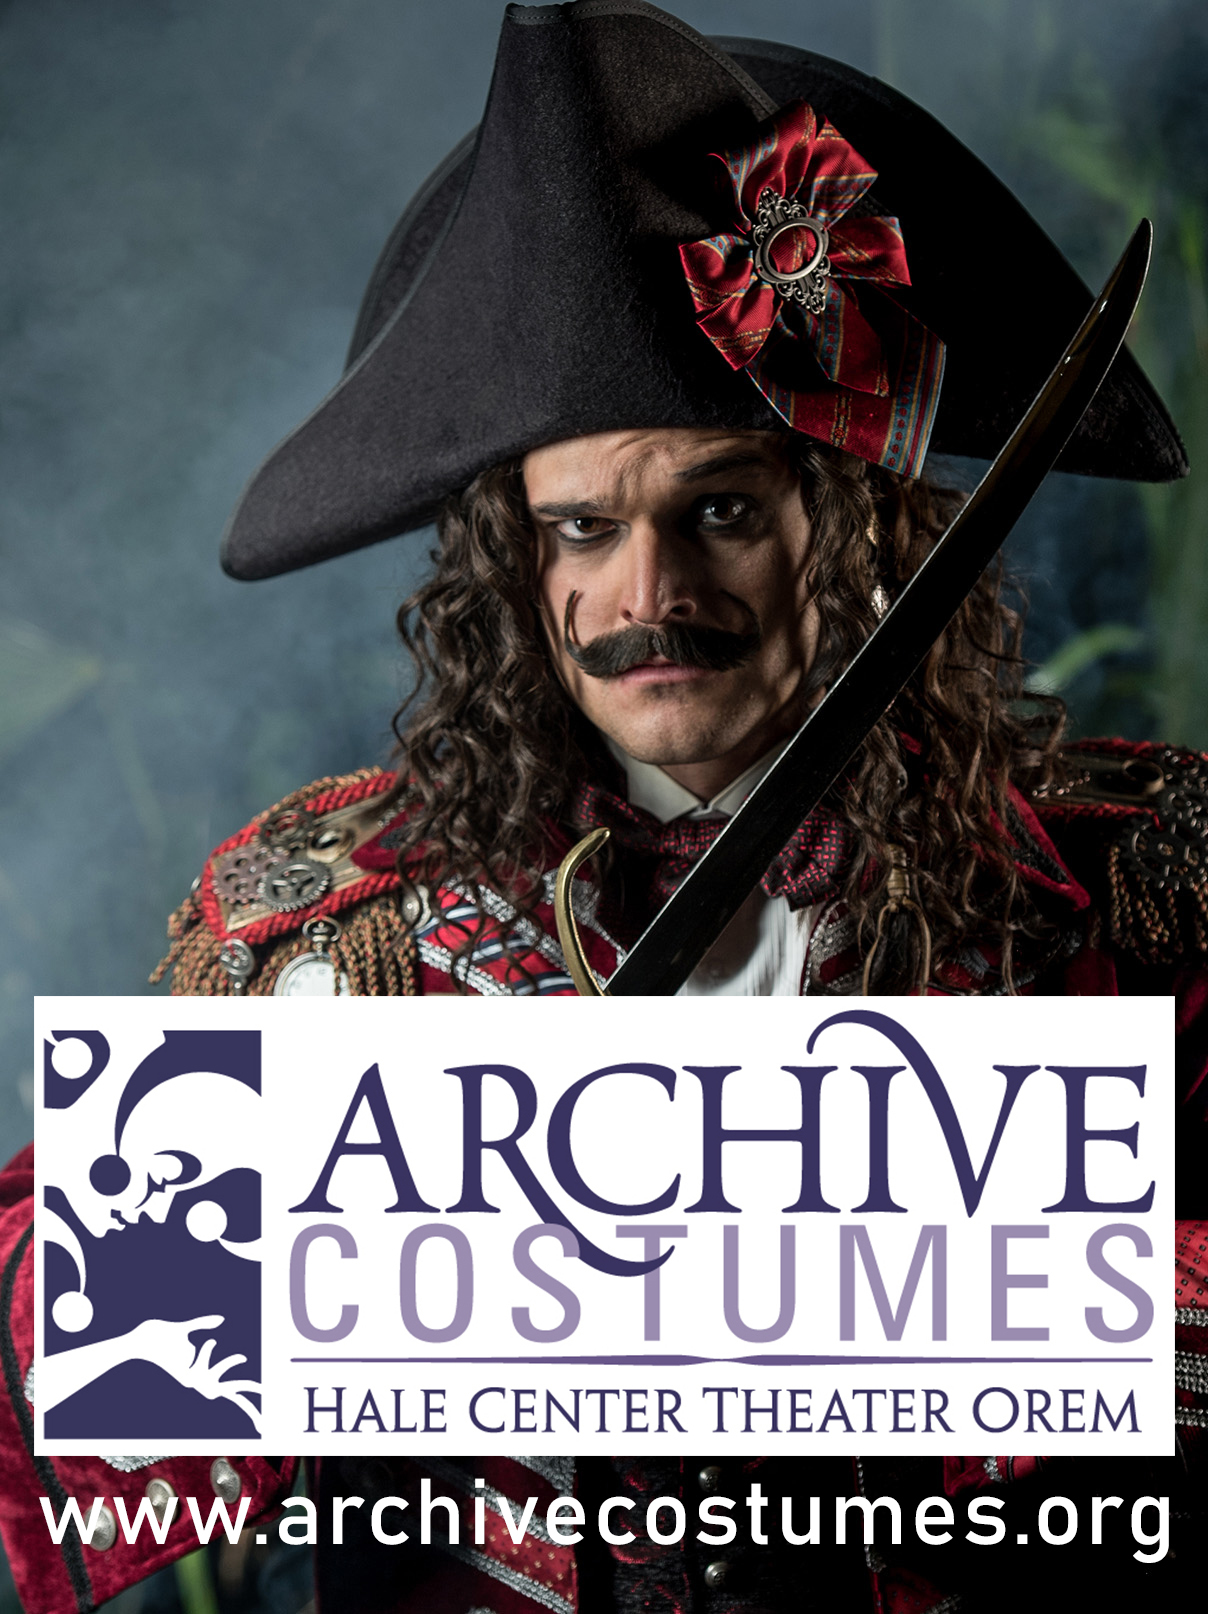 Archive costumes ad